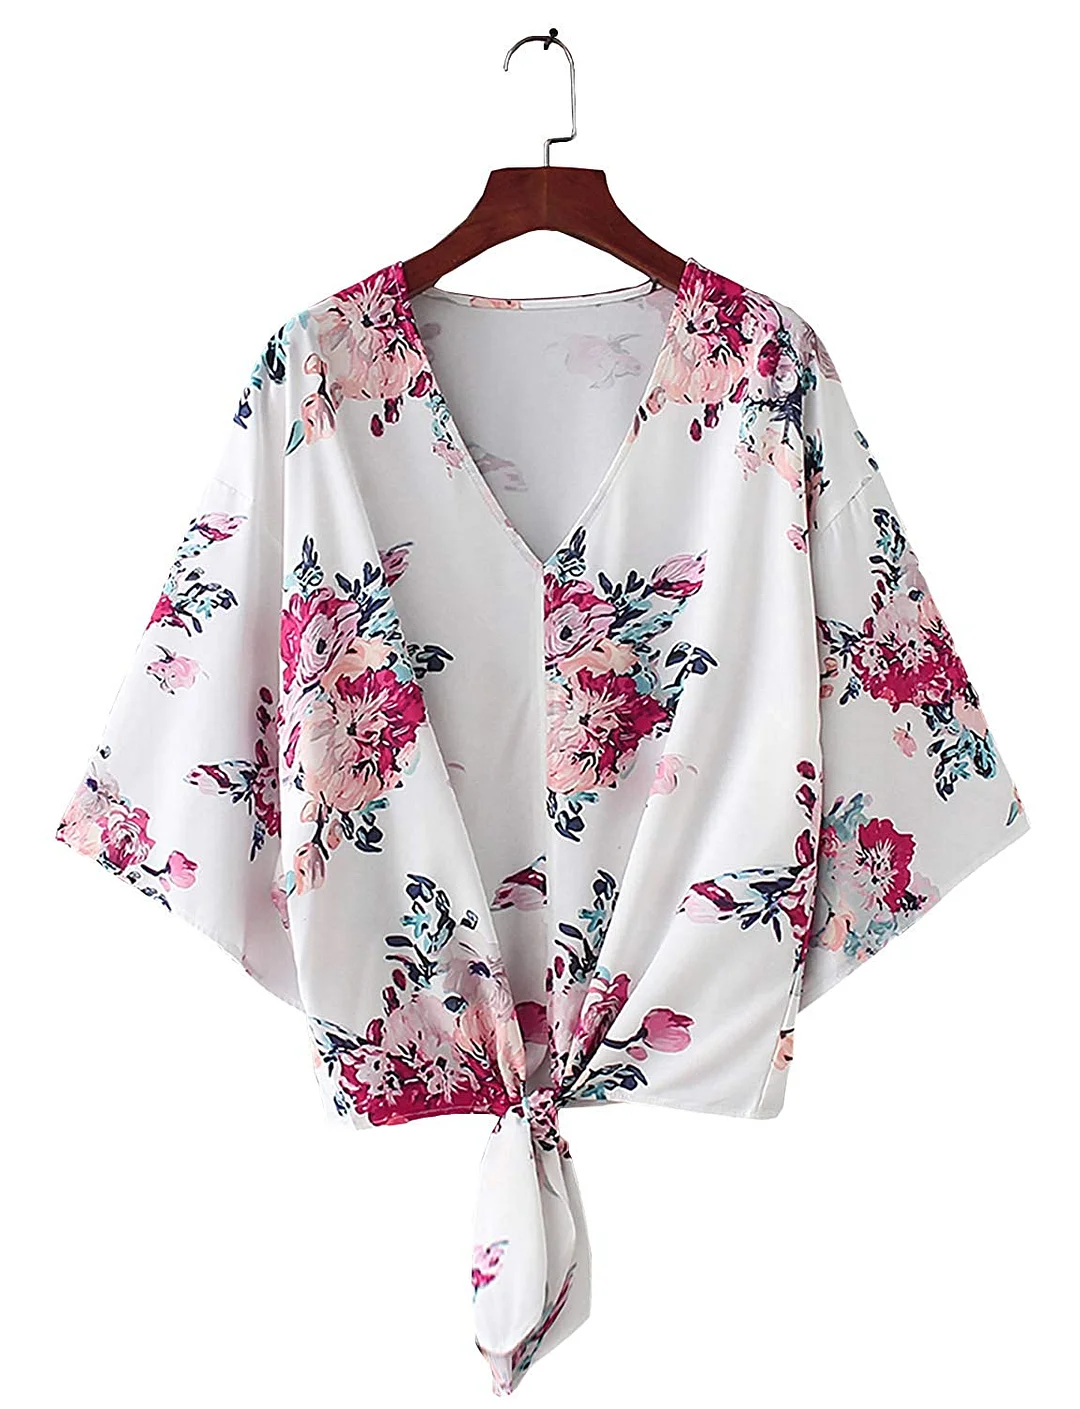 Womens Floral Blouse Tops V Neck Tie Knot Front Short Bell Sleeve Tops Shirts Wraps